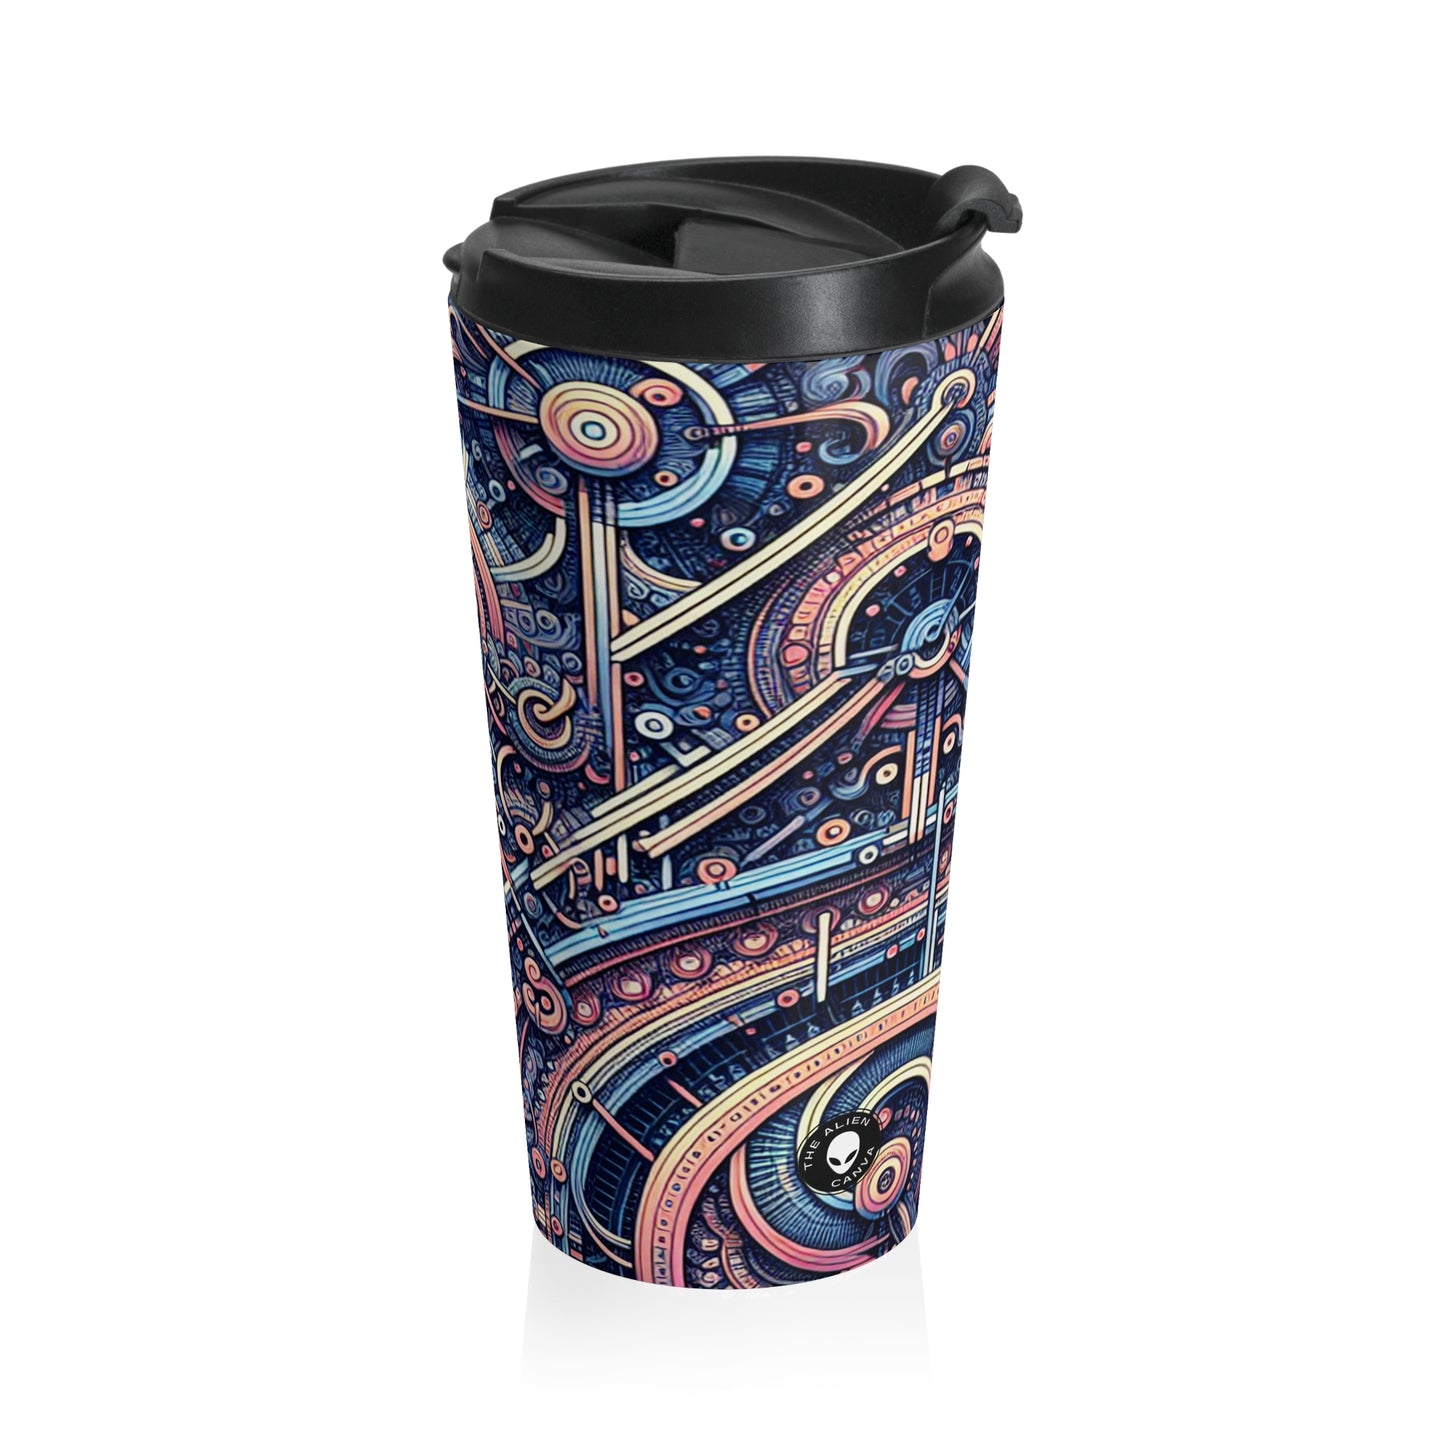 "Chaos & Order: A Dynamic Dance of Colors and Patterns" - The Alien Stainless Steel Travel Mug Algorithmic Art